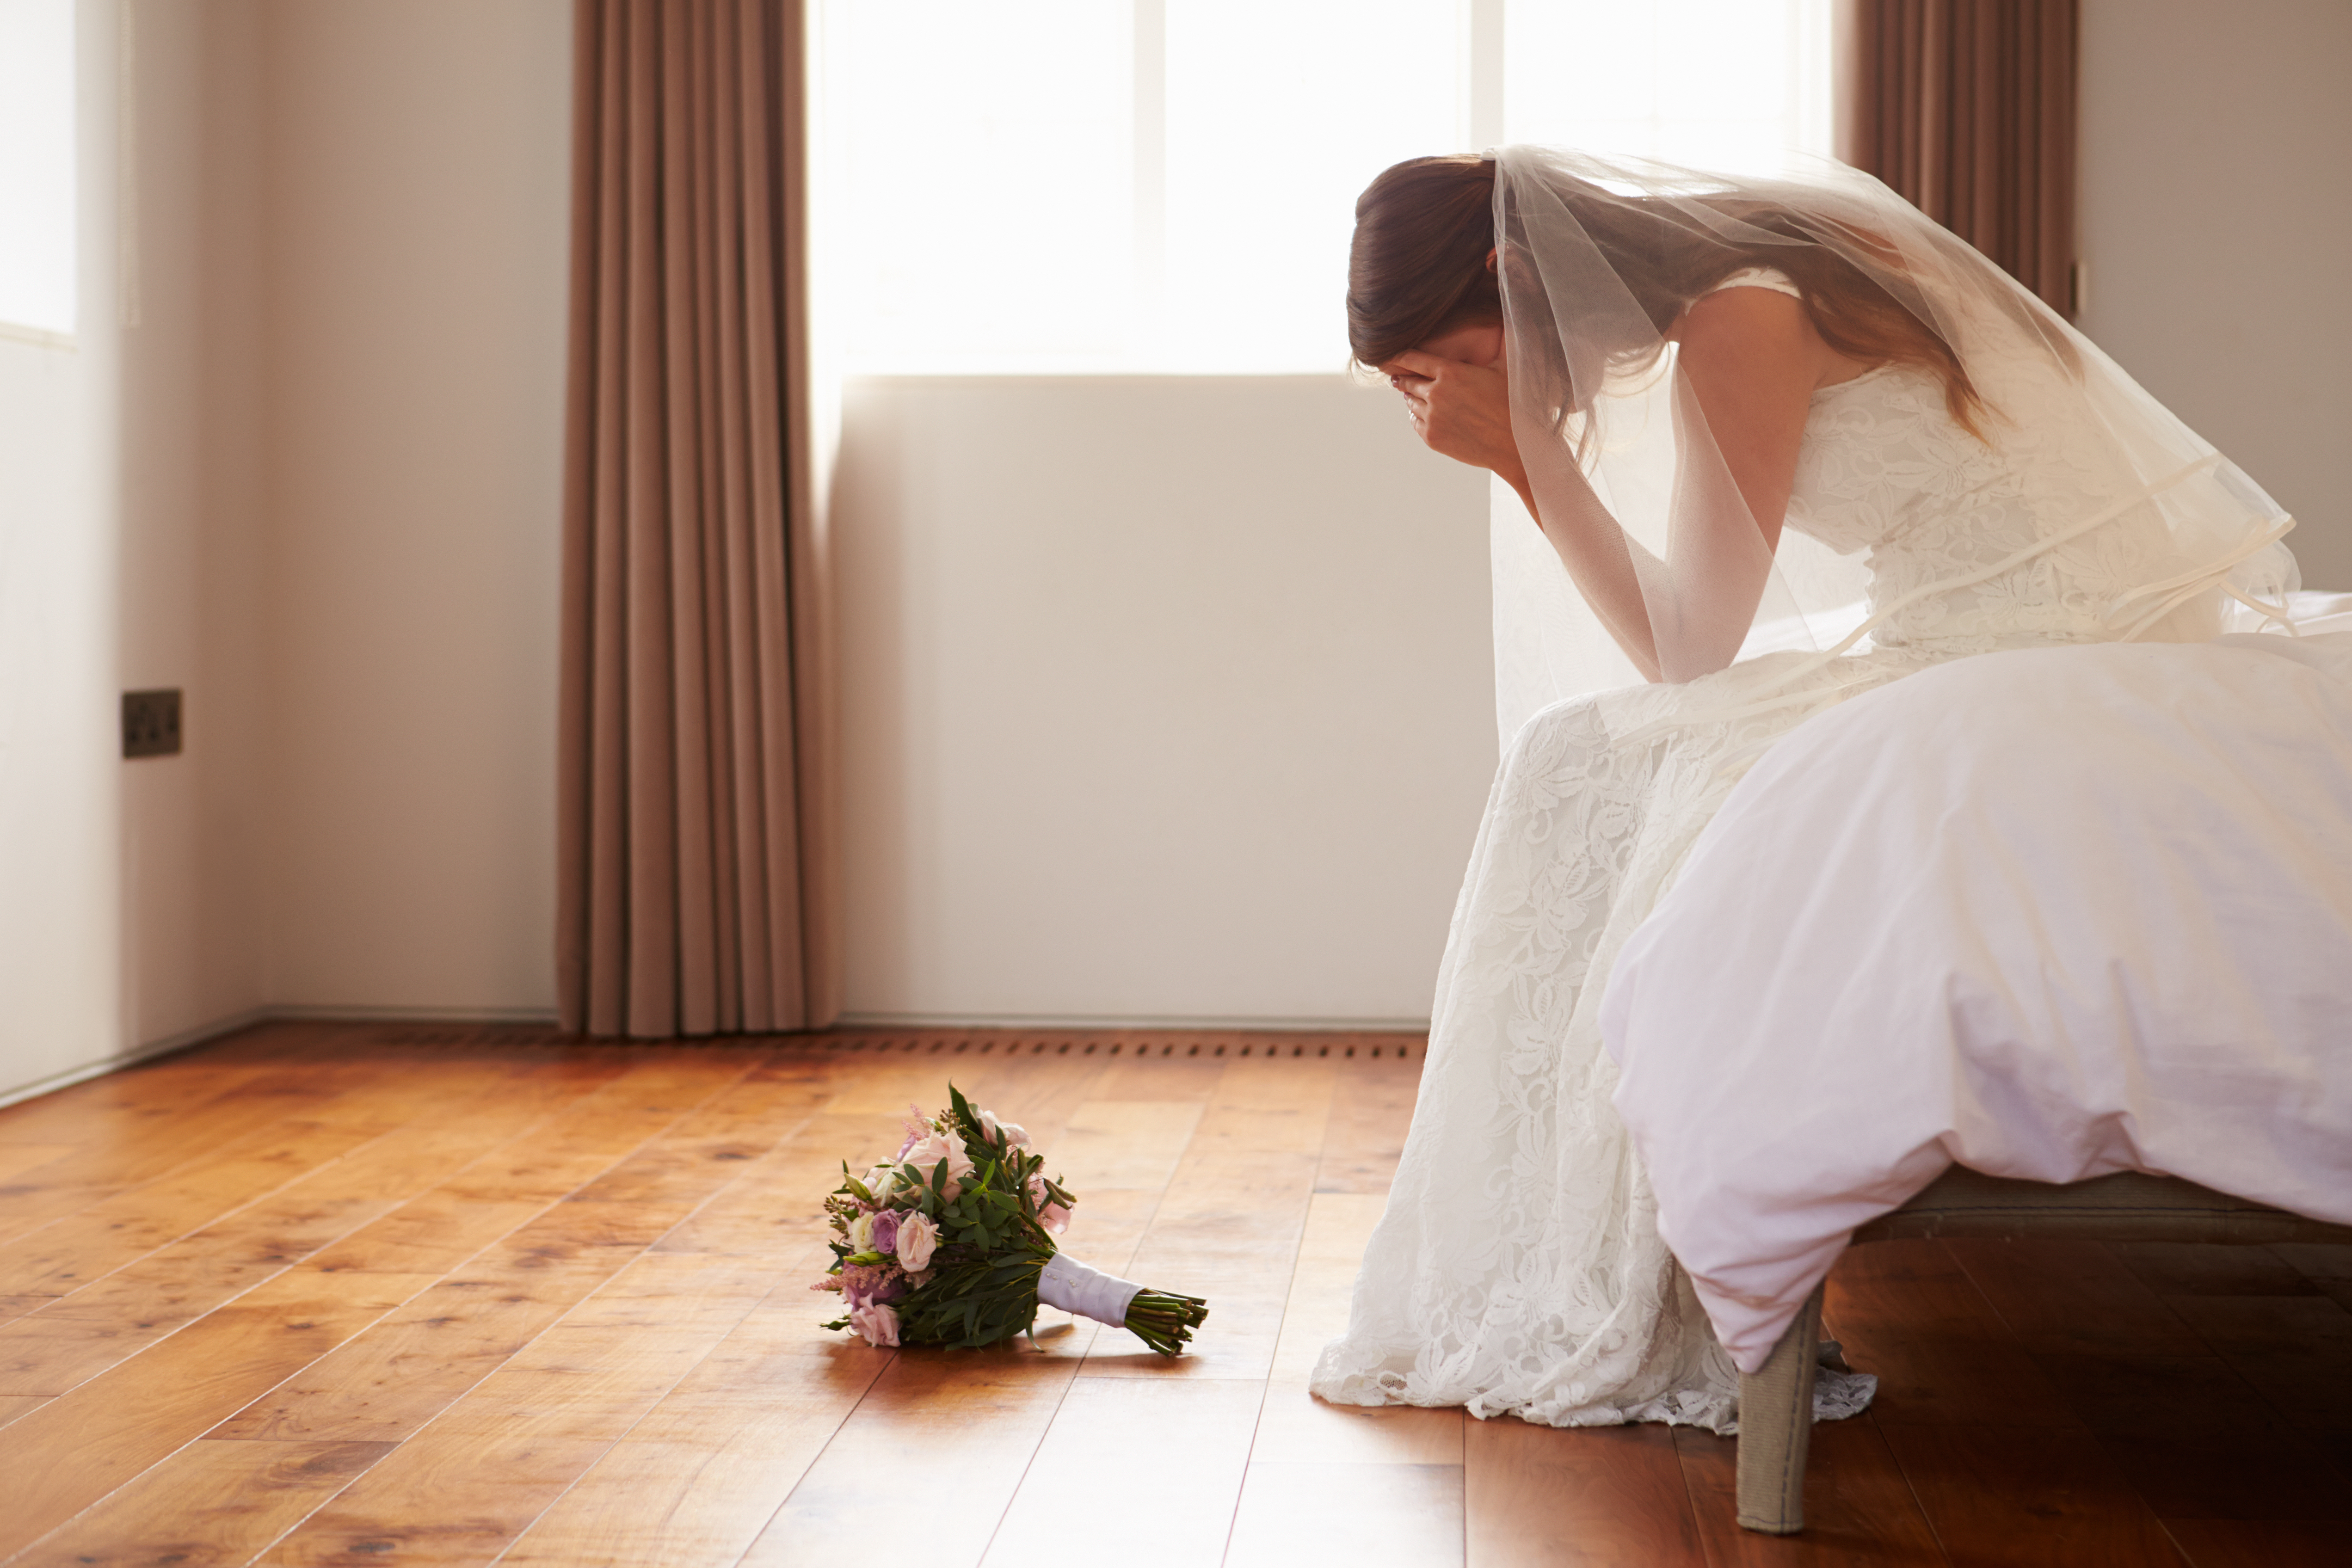 A bride crying in a room | Source: Shutterstock